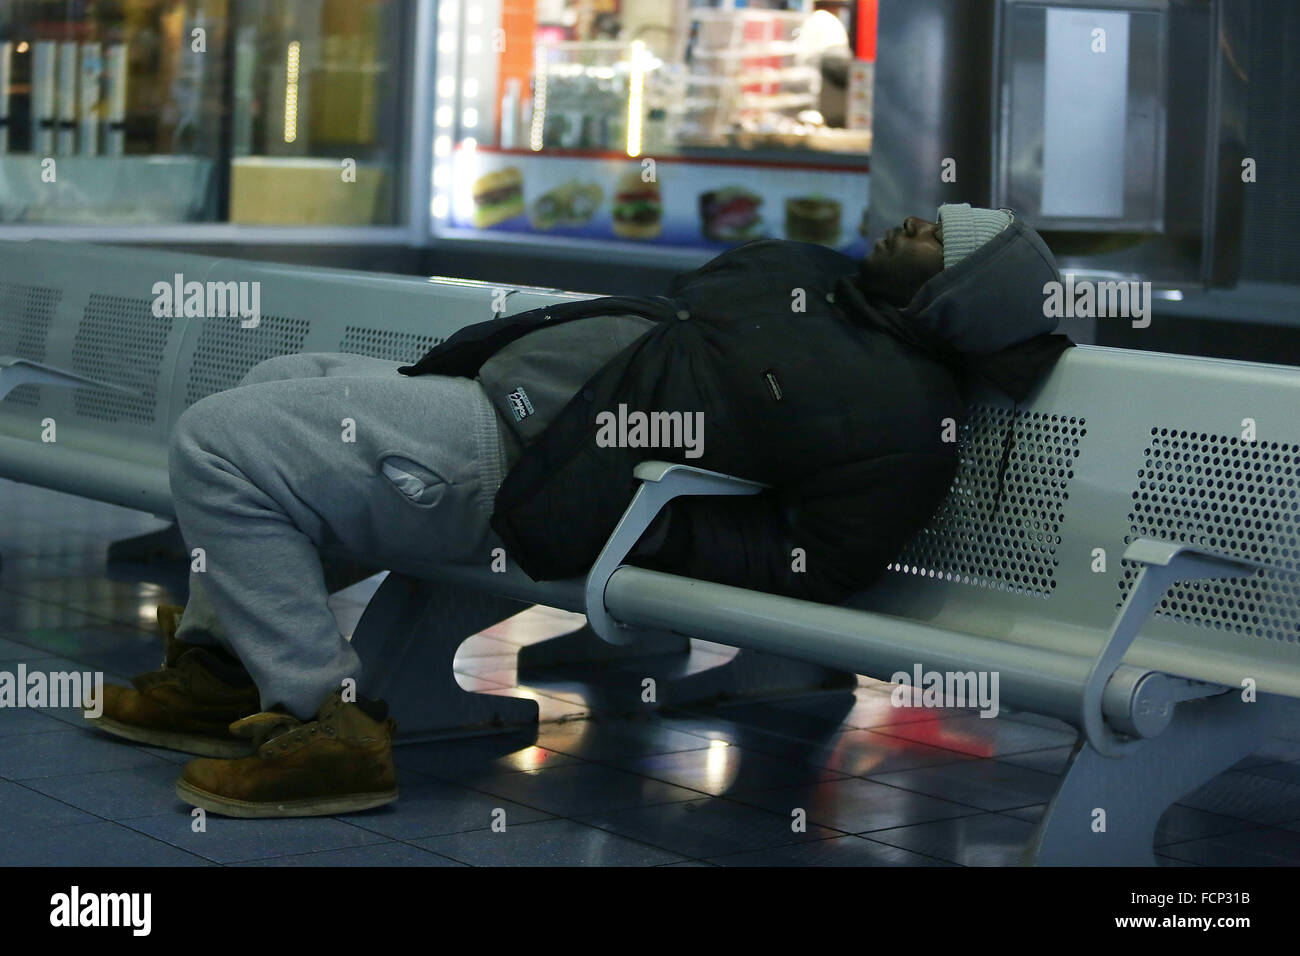 New York, New York, USA. 23rd Jan, 2016. A man sleeps in the Staten Island Ferry St. George terminal during Winter Storm Jonas. A travel ban had been in place for hours, but the ferry still operated. Snowfall projections for Staten Island were approximately 12-18in, with winds gusting up to 50 miles an hour. Late afternoon, buses ceased to run and a travel ban was enforced by the NYPD. This lack of transportation stranded many residents of Staten Island who had taken the ferry home. People were forced to try and walk to their destination in the blizzard. New York Governor Cuomo declared a Sta Stock Photo